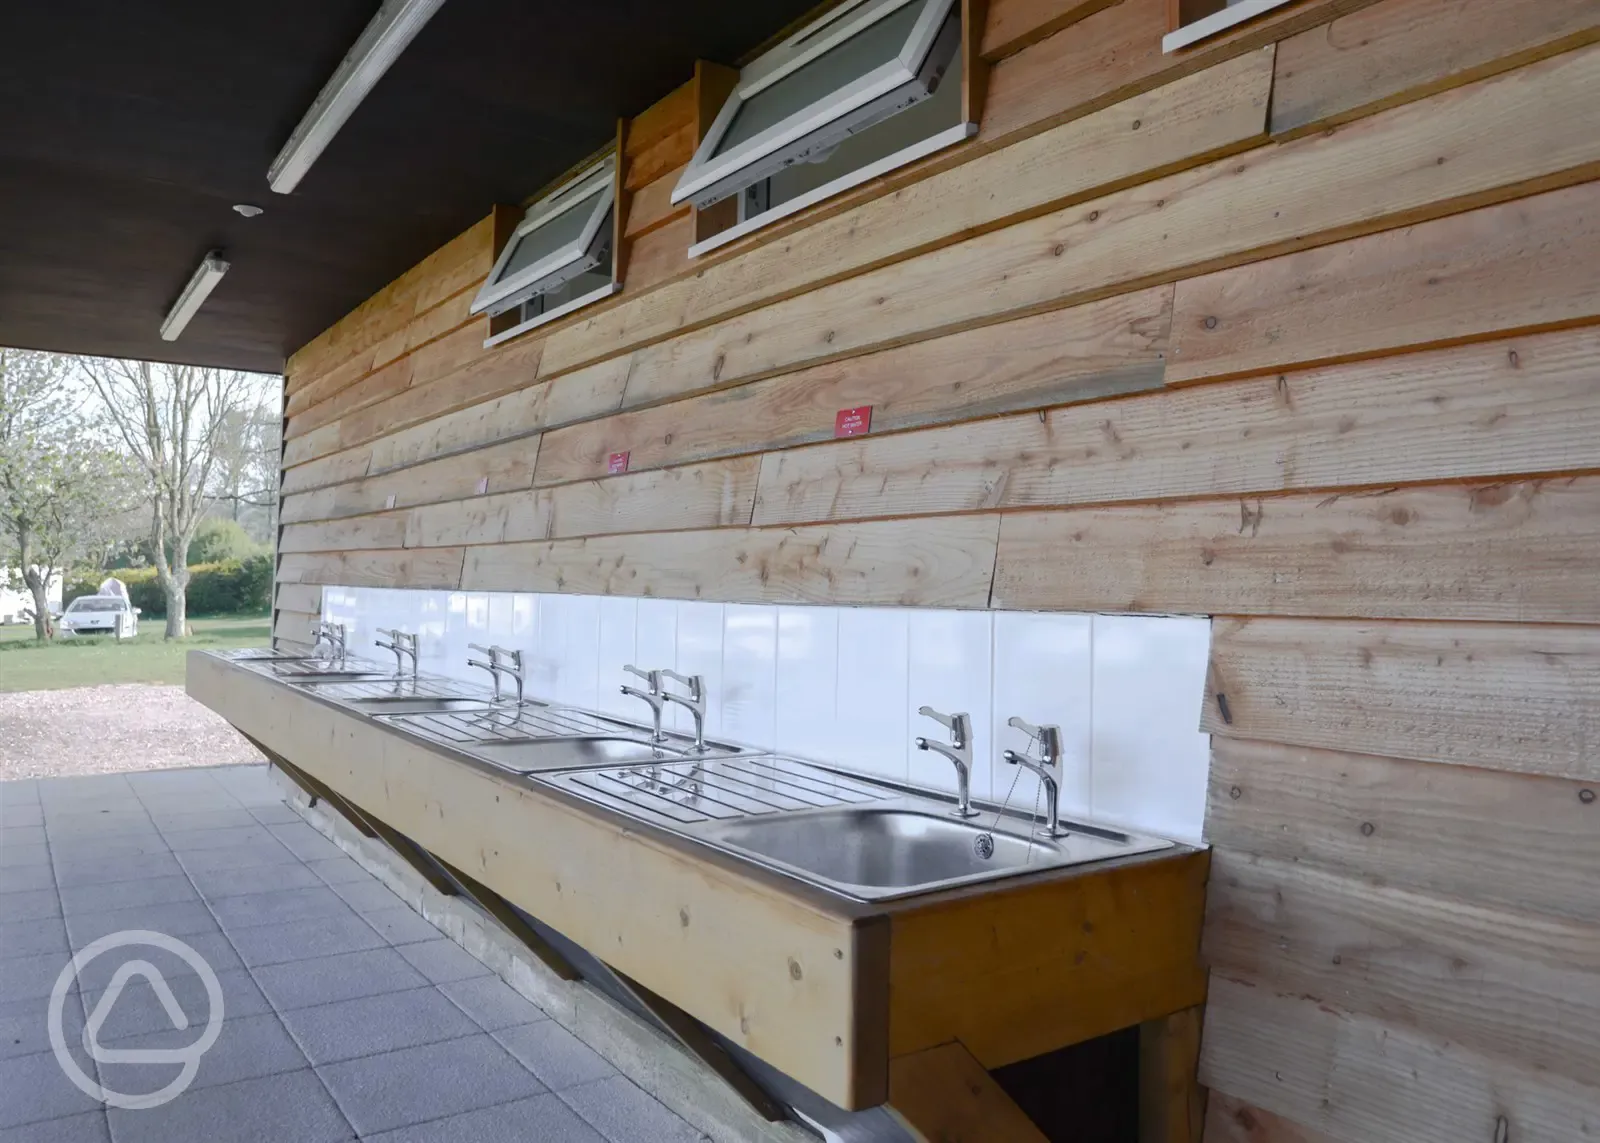 Outdoor washing up area